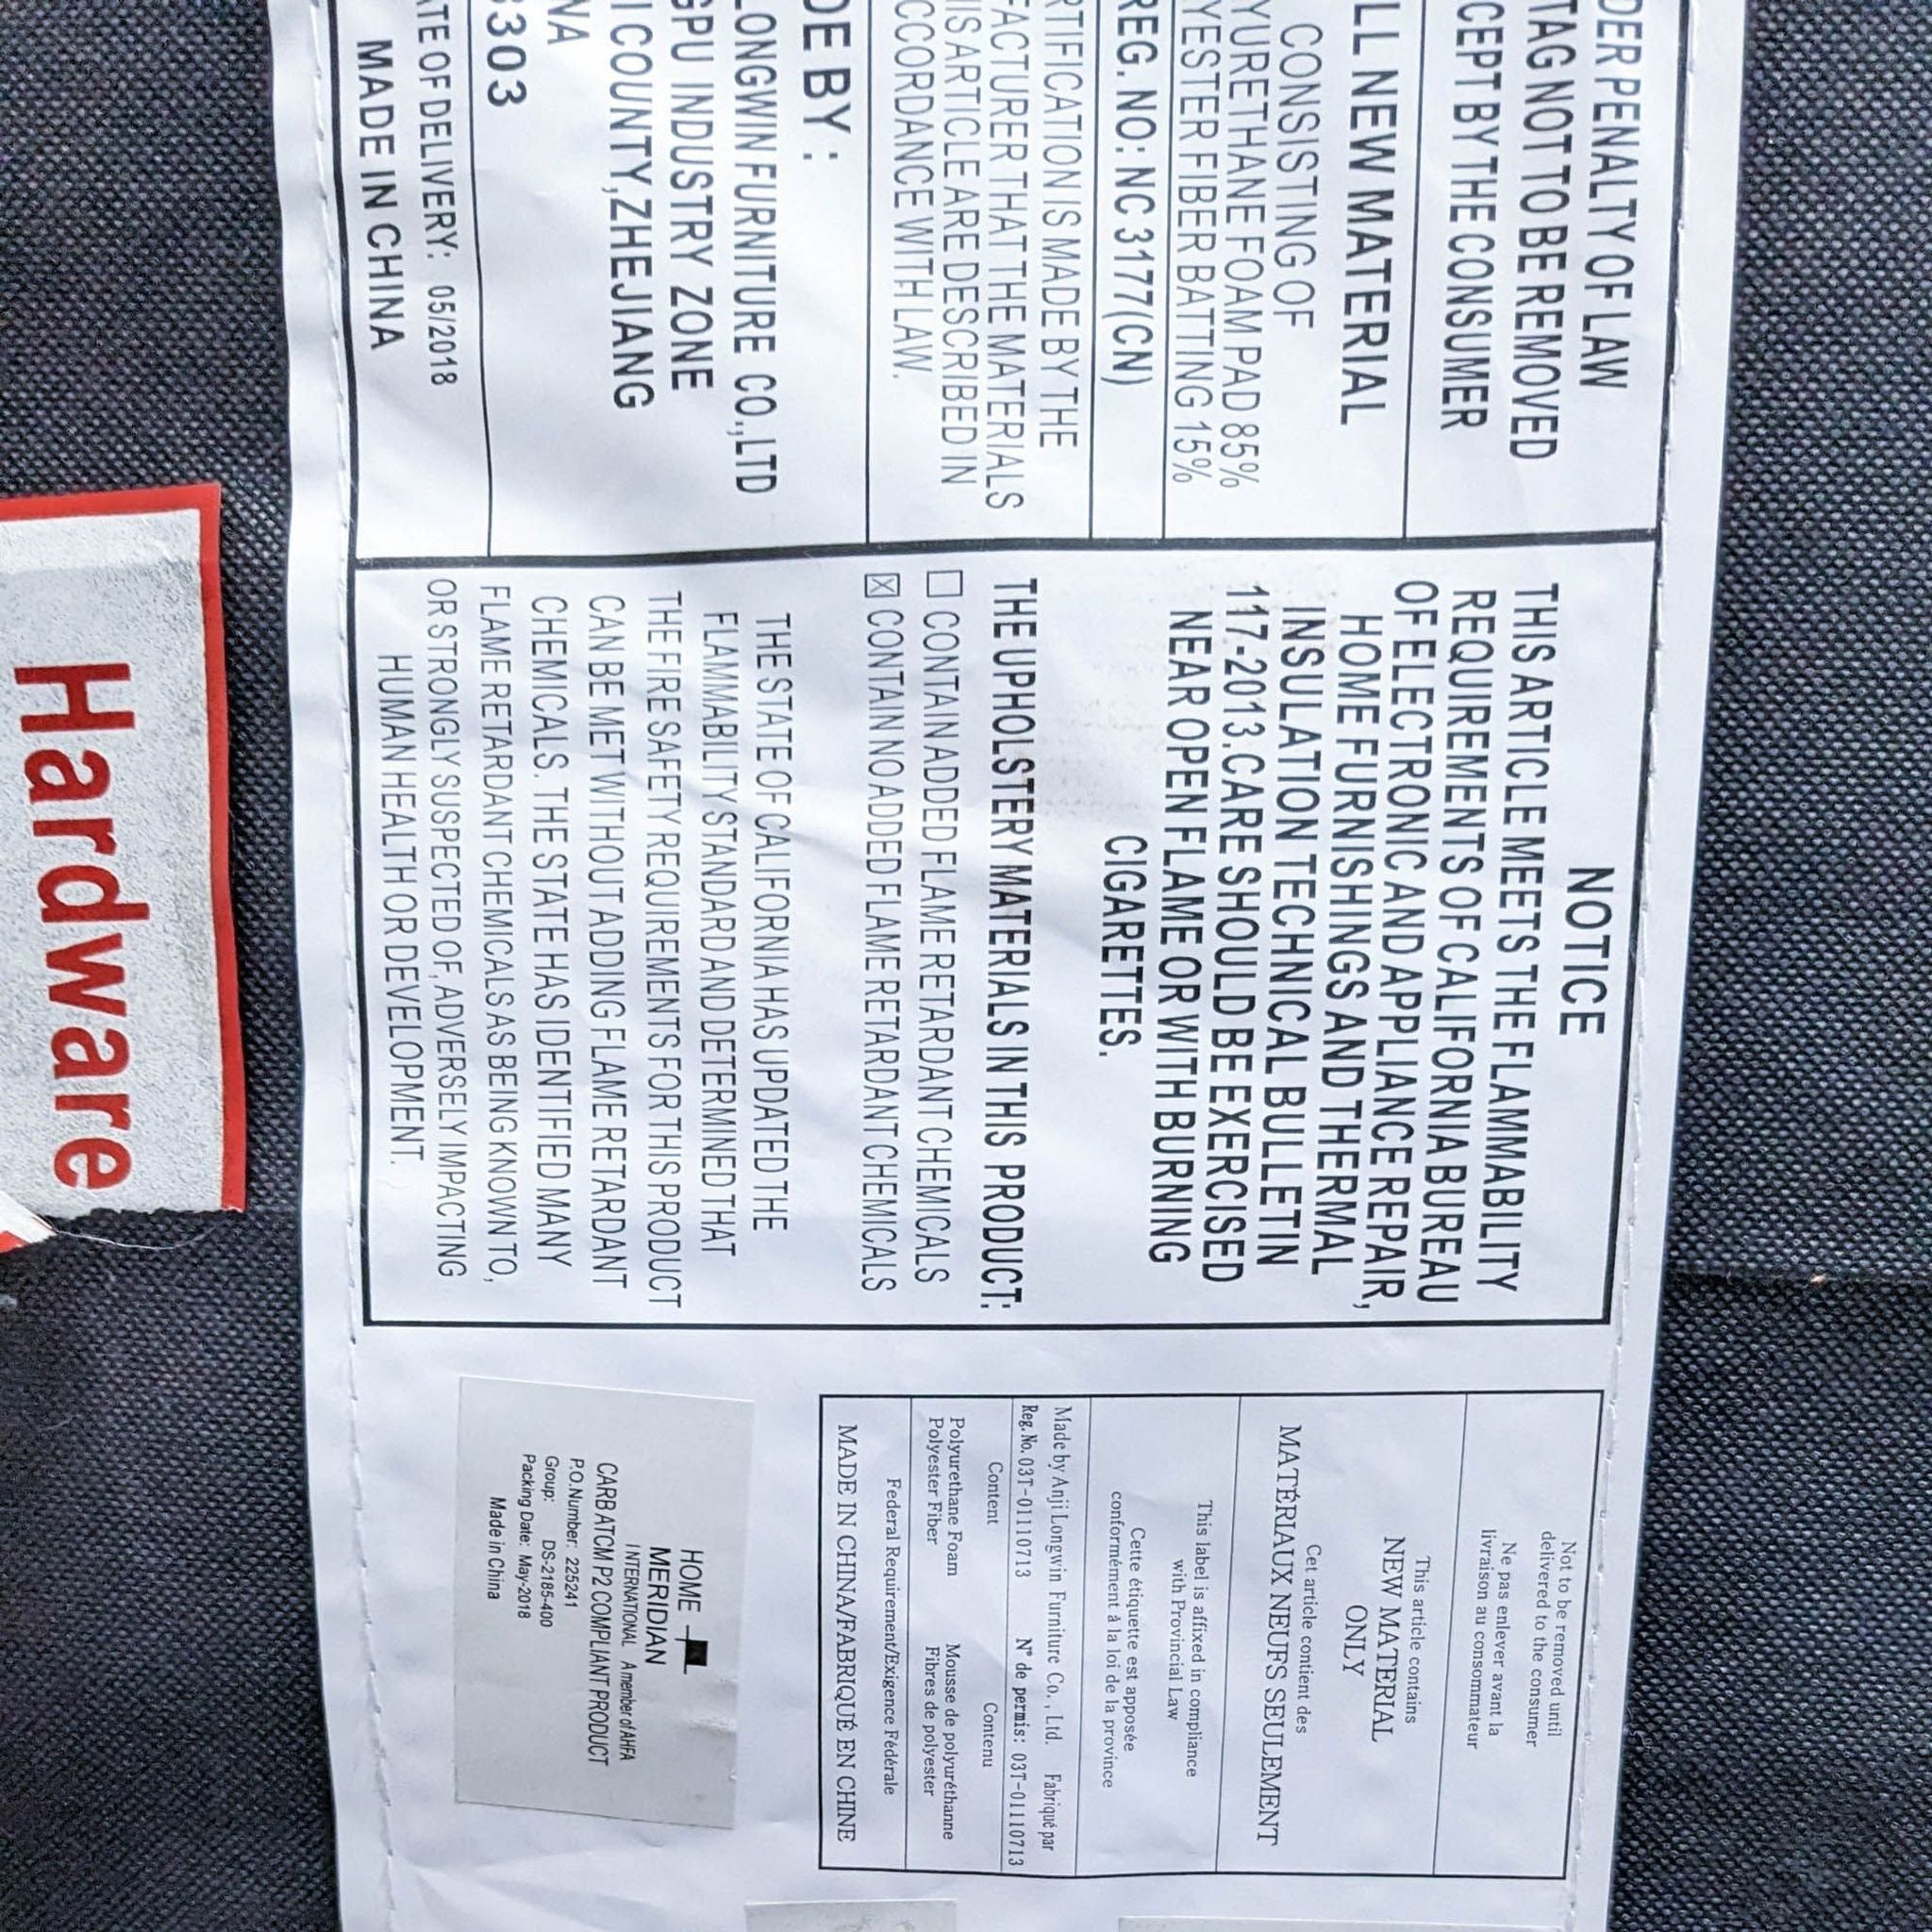 Alt text 3: Close-up of a care label on a Home Meridian dark grey loveseat detailing upholstery and safety information.